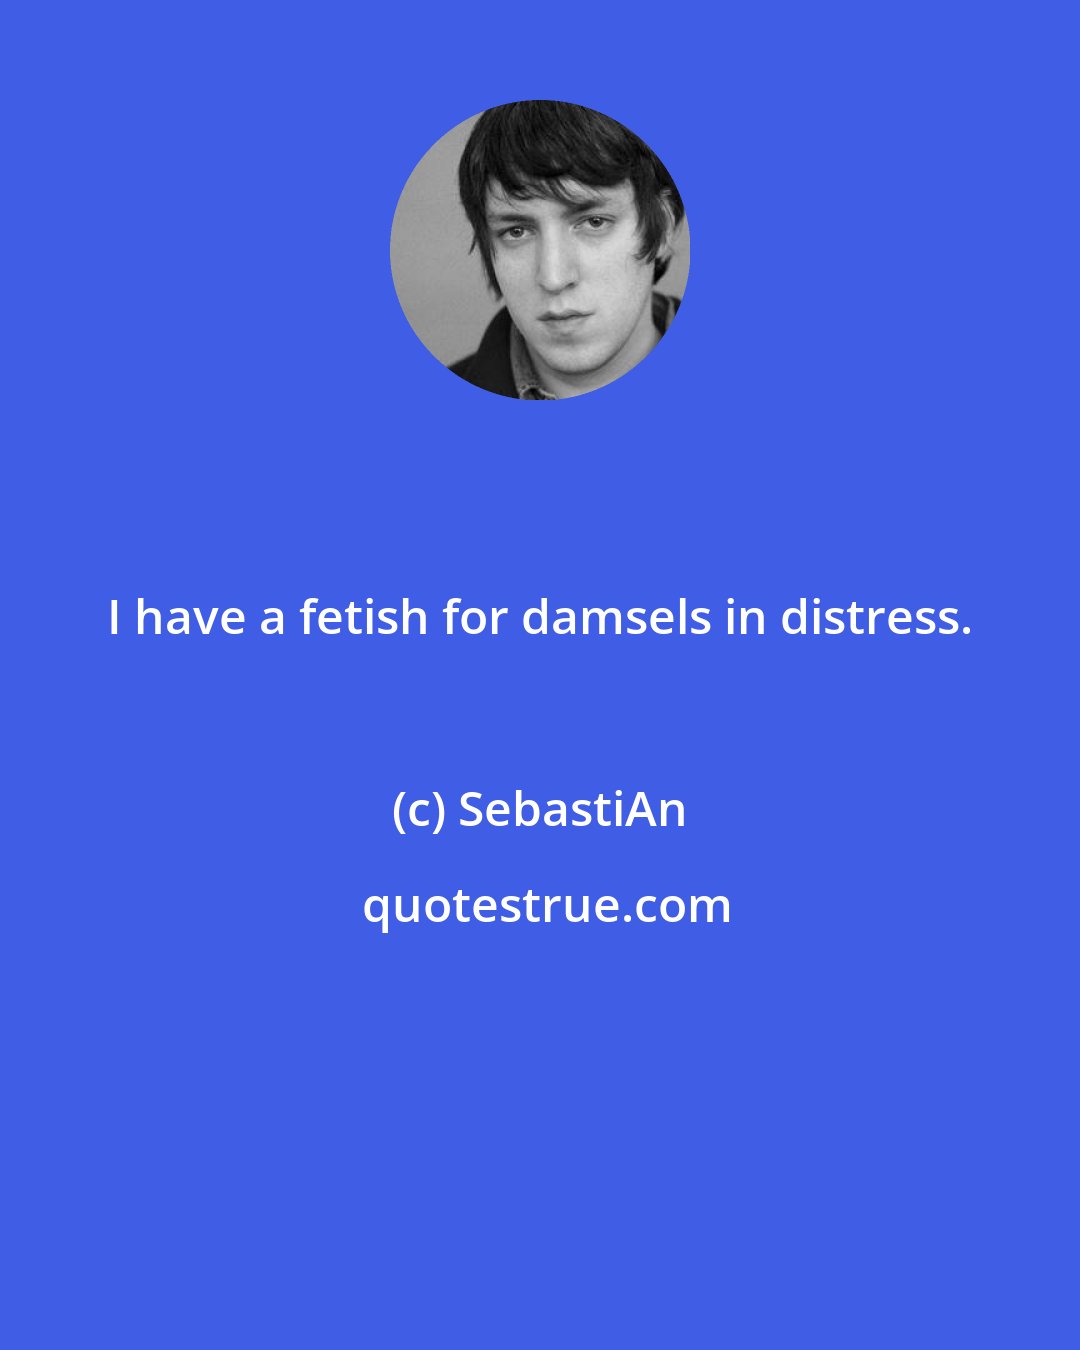 SebastiAn: I have a fetish for damsels in distress.